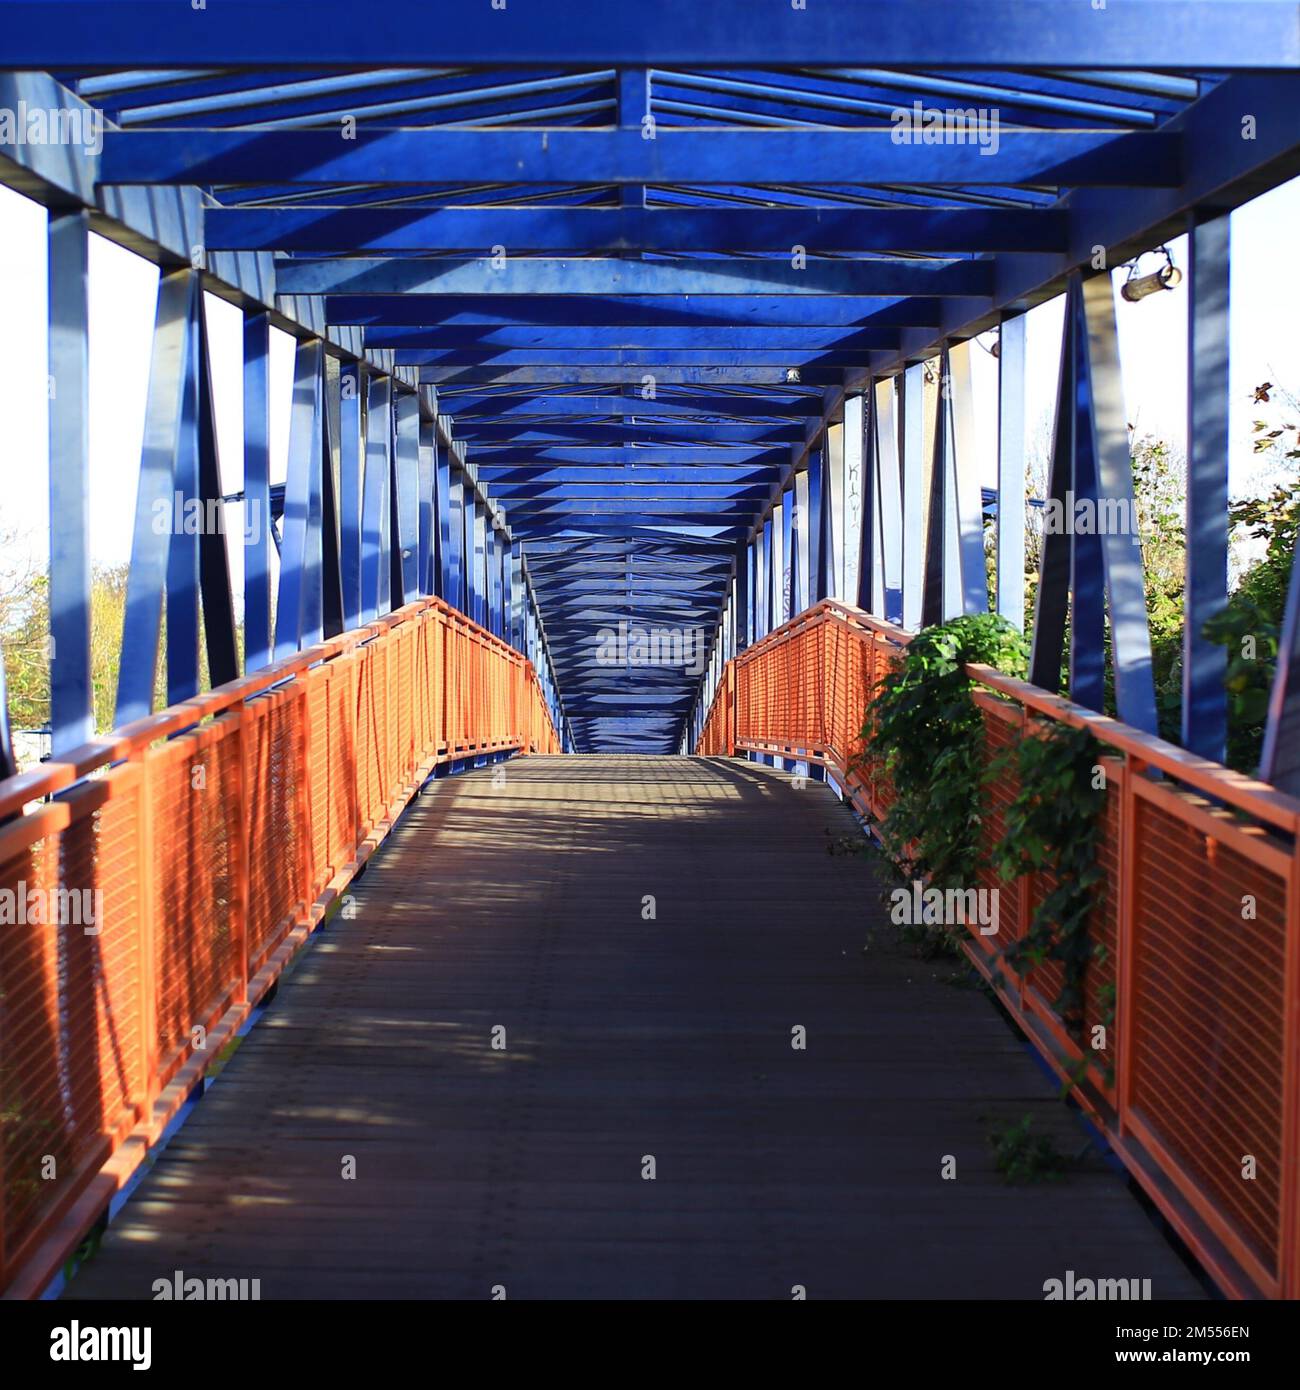 Central perspective view of pedestrian overpass in Magdeburg, Germany. Stock Photo